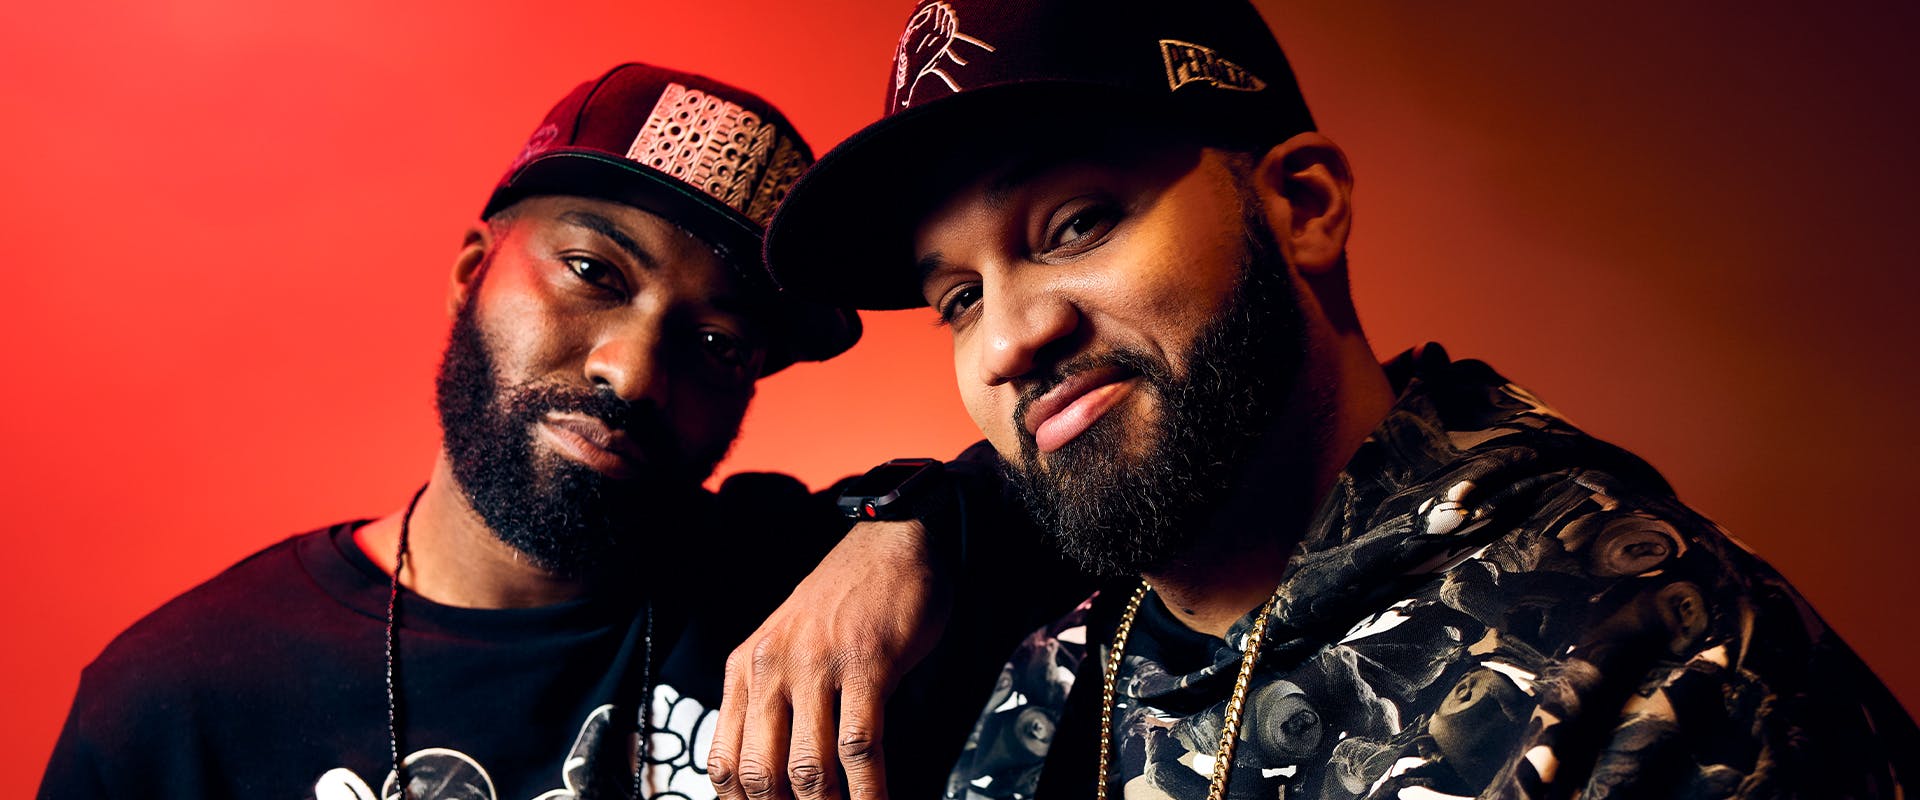 Desus Nice and The Kid Mero of Showtime's 'Desus & Mero' pose for a portrait during the 2019 Winter TCA Getty Images Portrait Studio at The Langham Huntington, Pasadena on January 31, 2019 in Pasadena, California. (Photo by Robby Klein/Getty Images)